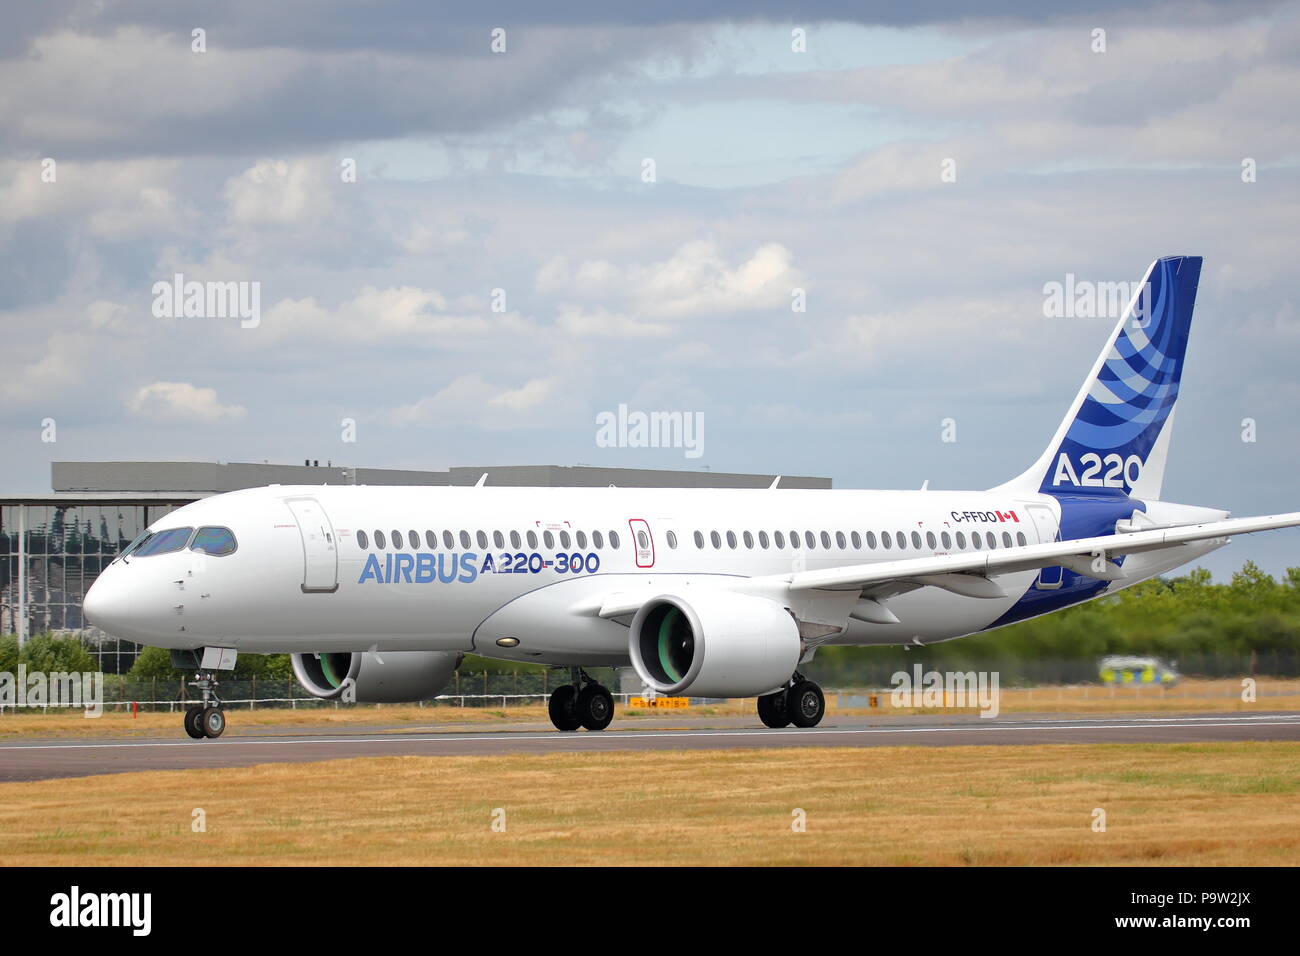 The Airbus A220-300, the latest addition to the Airbus family, showed its agility and maneuverability at the Farnborough International Airshow 2018 Stock Photo